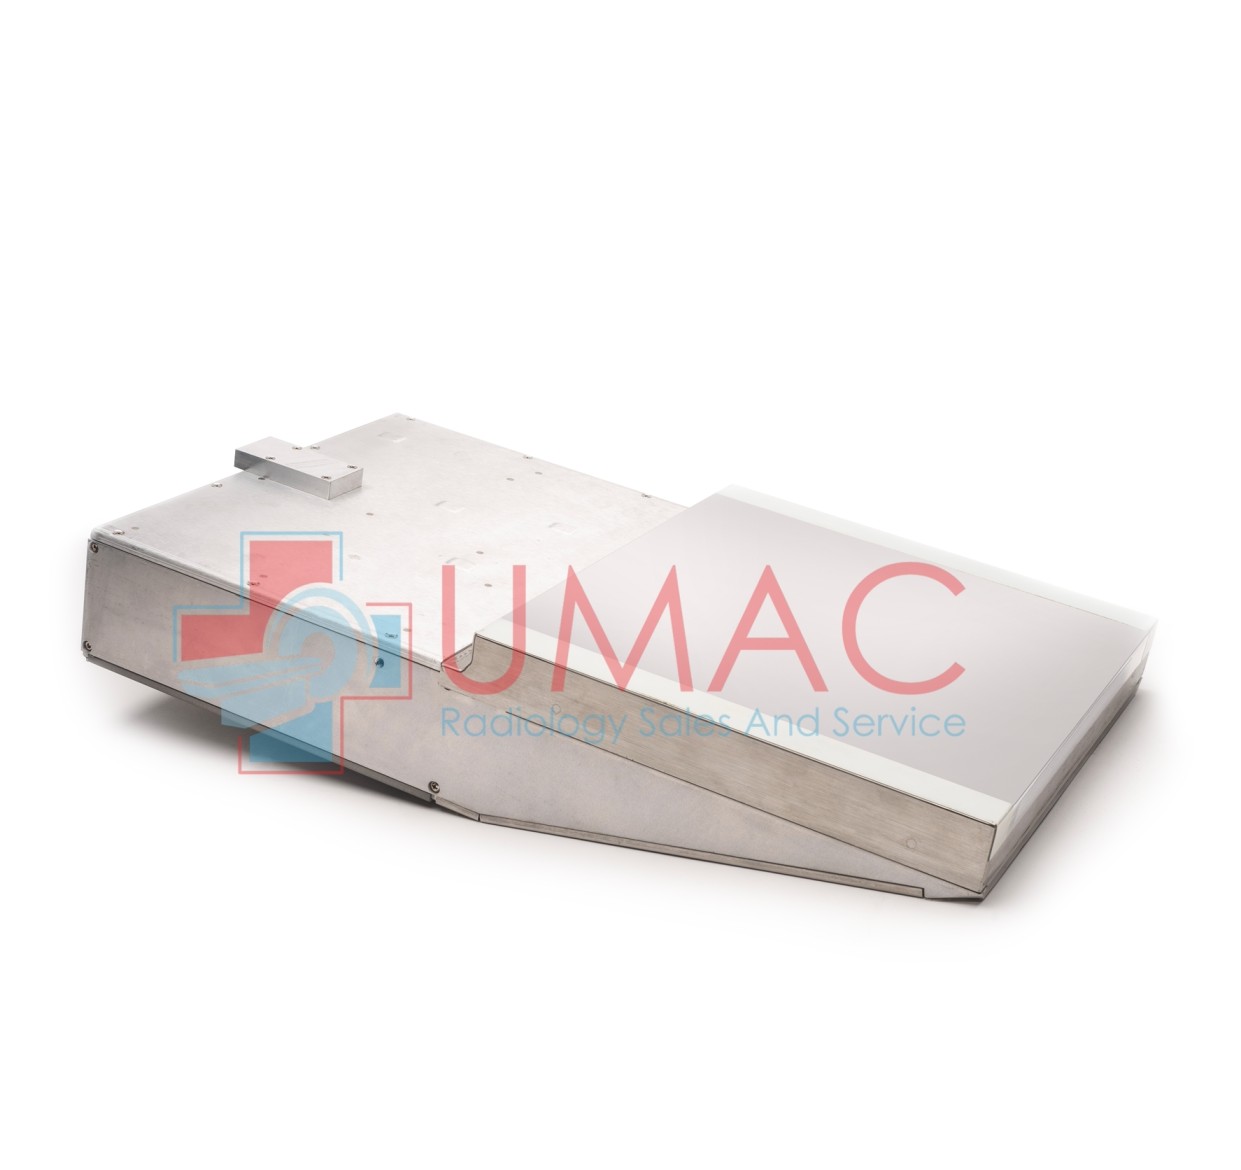 Hologic Dimensions Mammography PRD-01702 HDT Detector